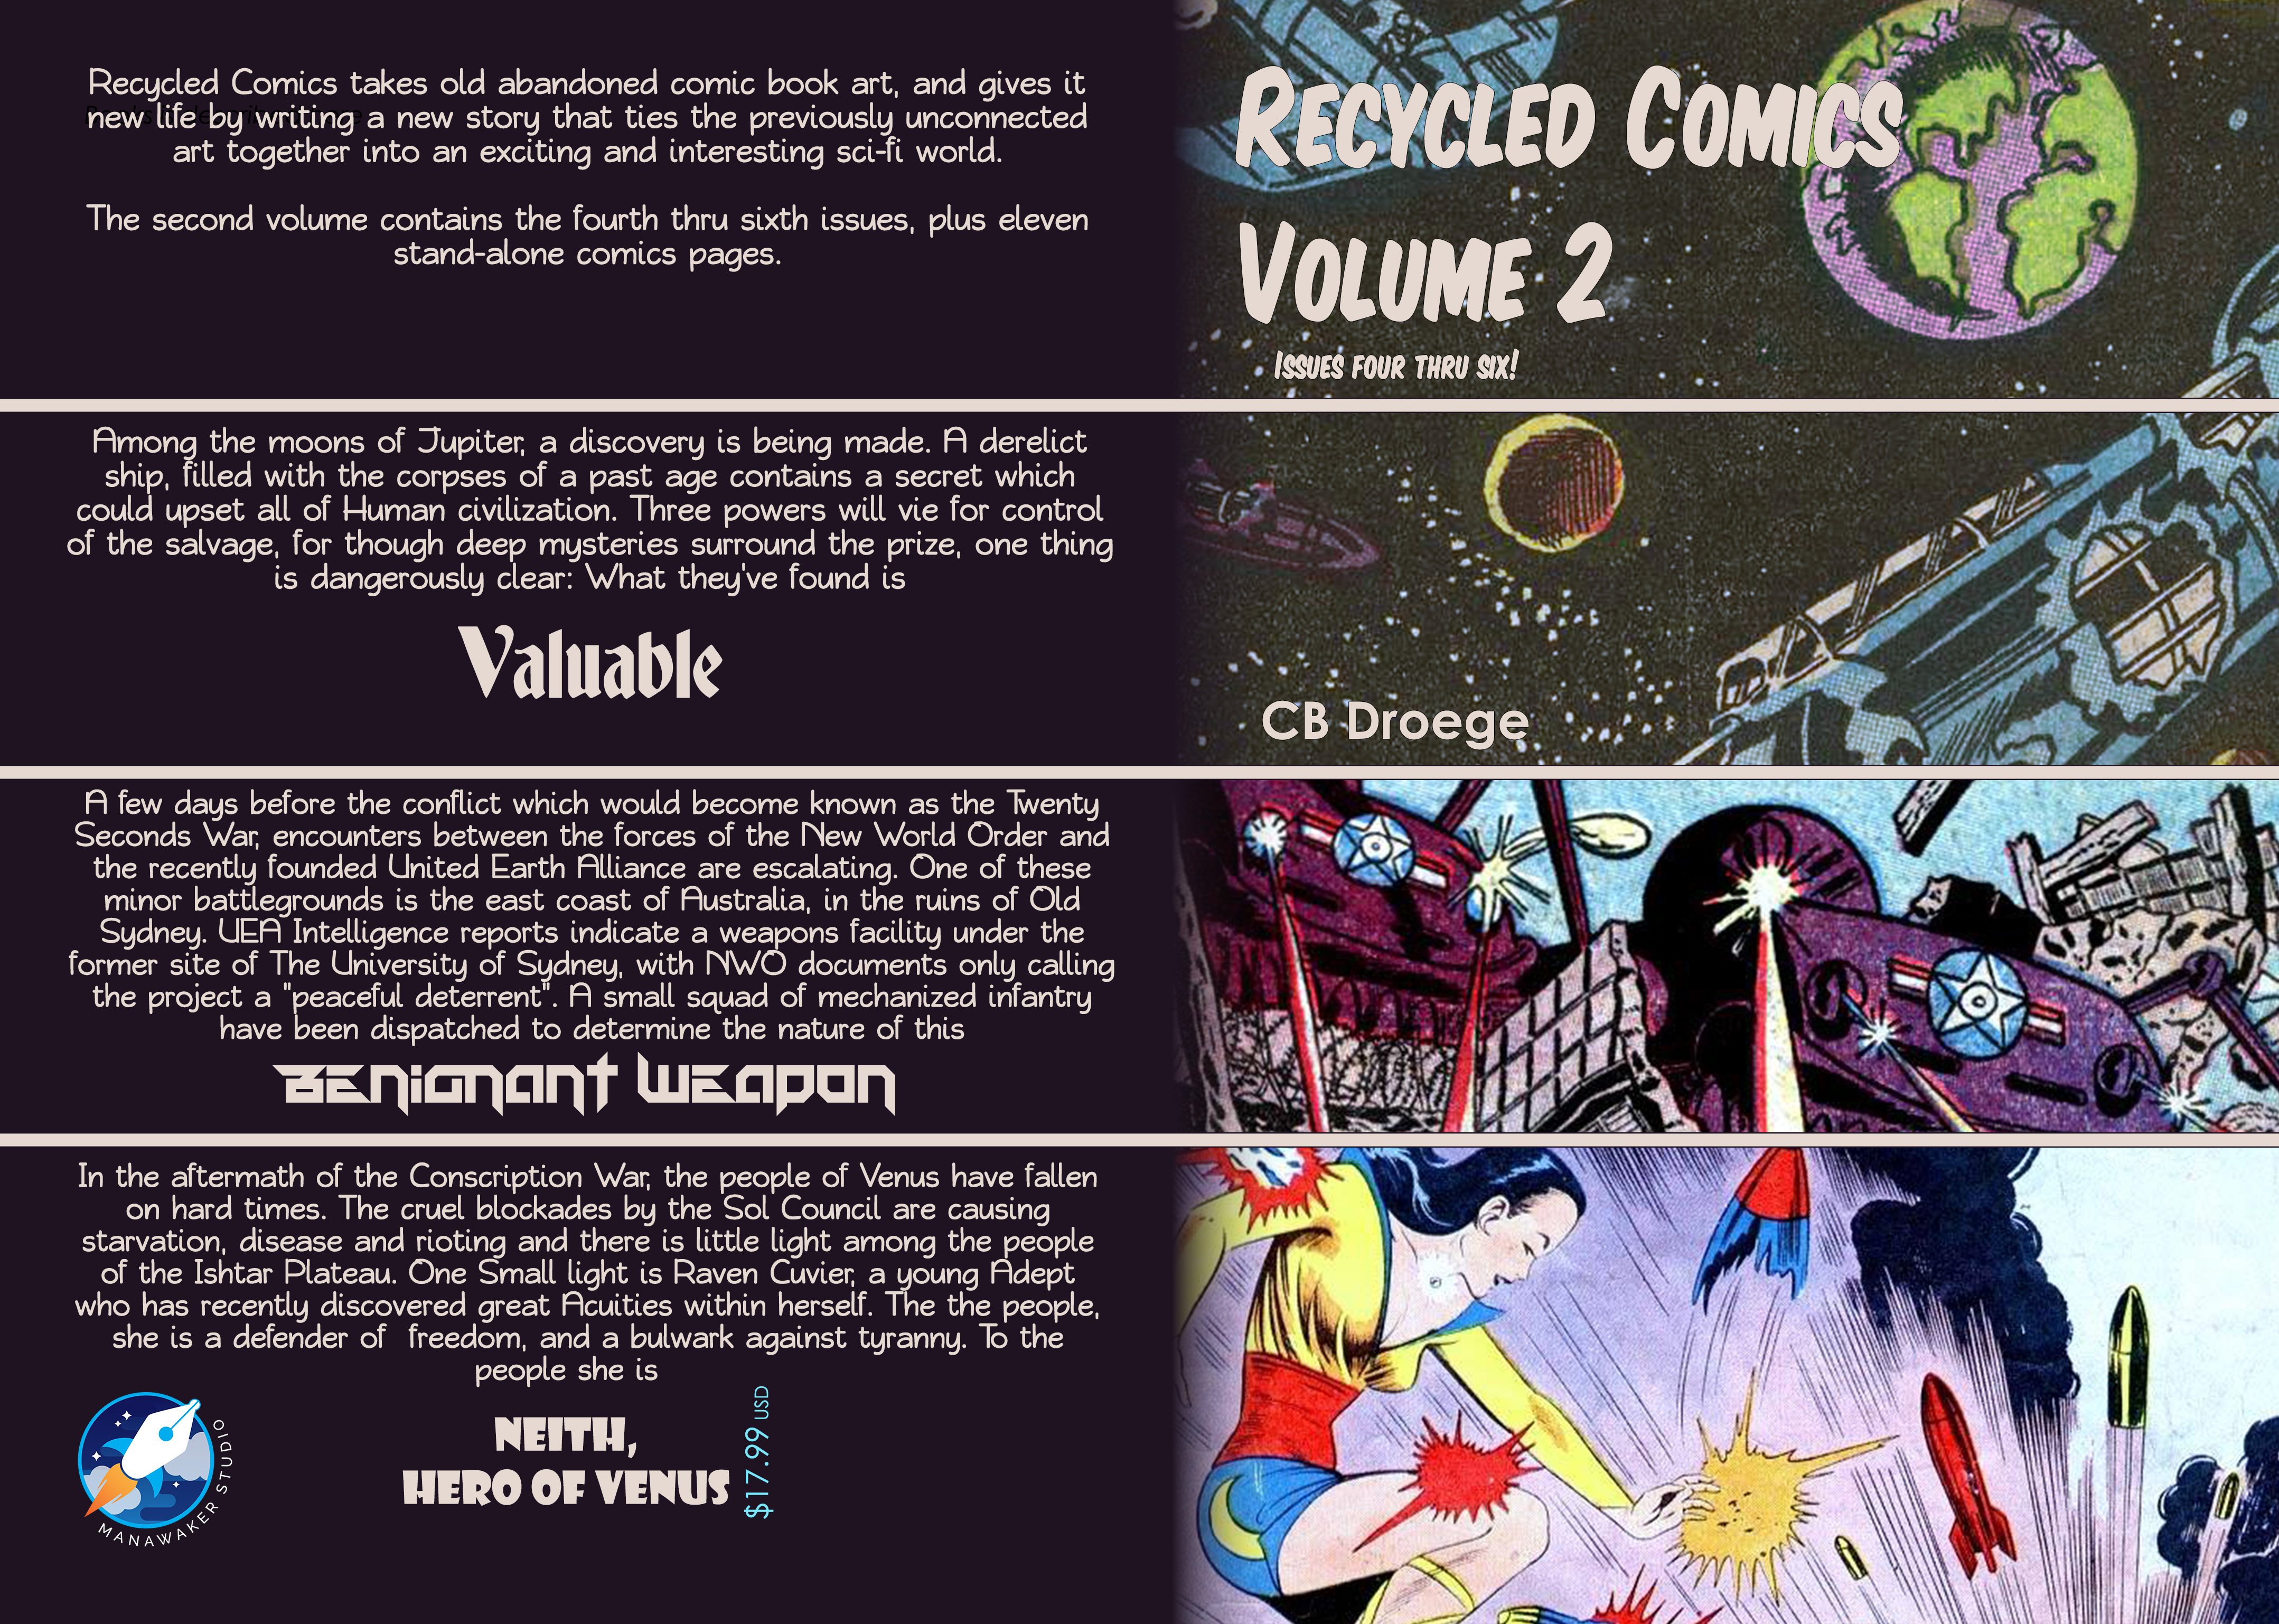 Recycled Comics Vol. II now available!